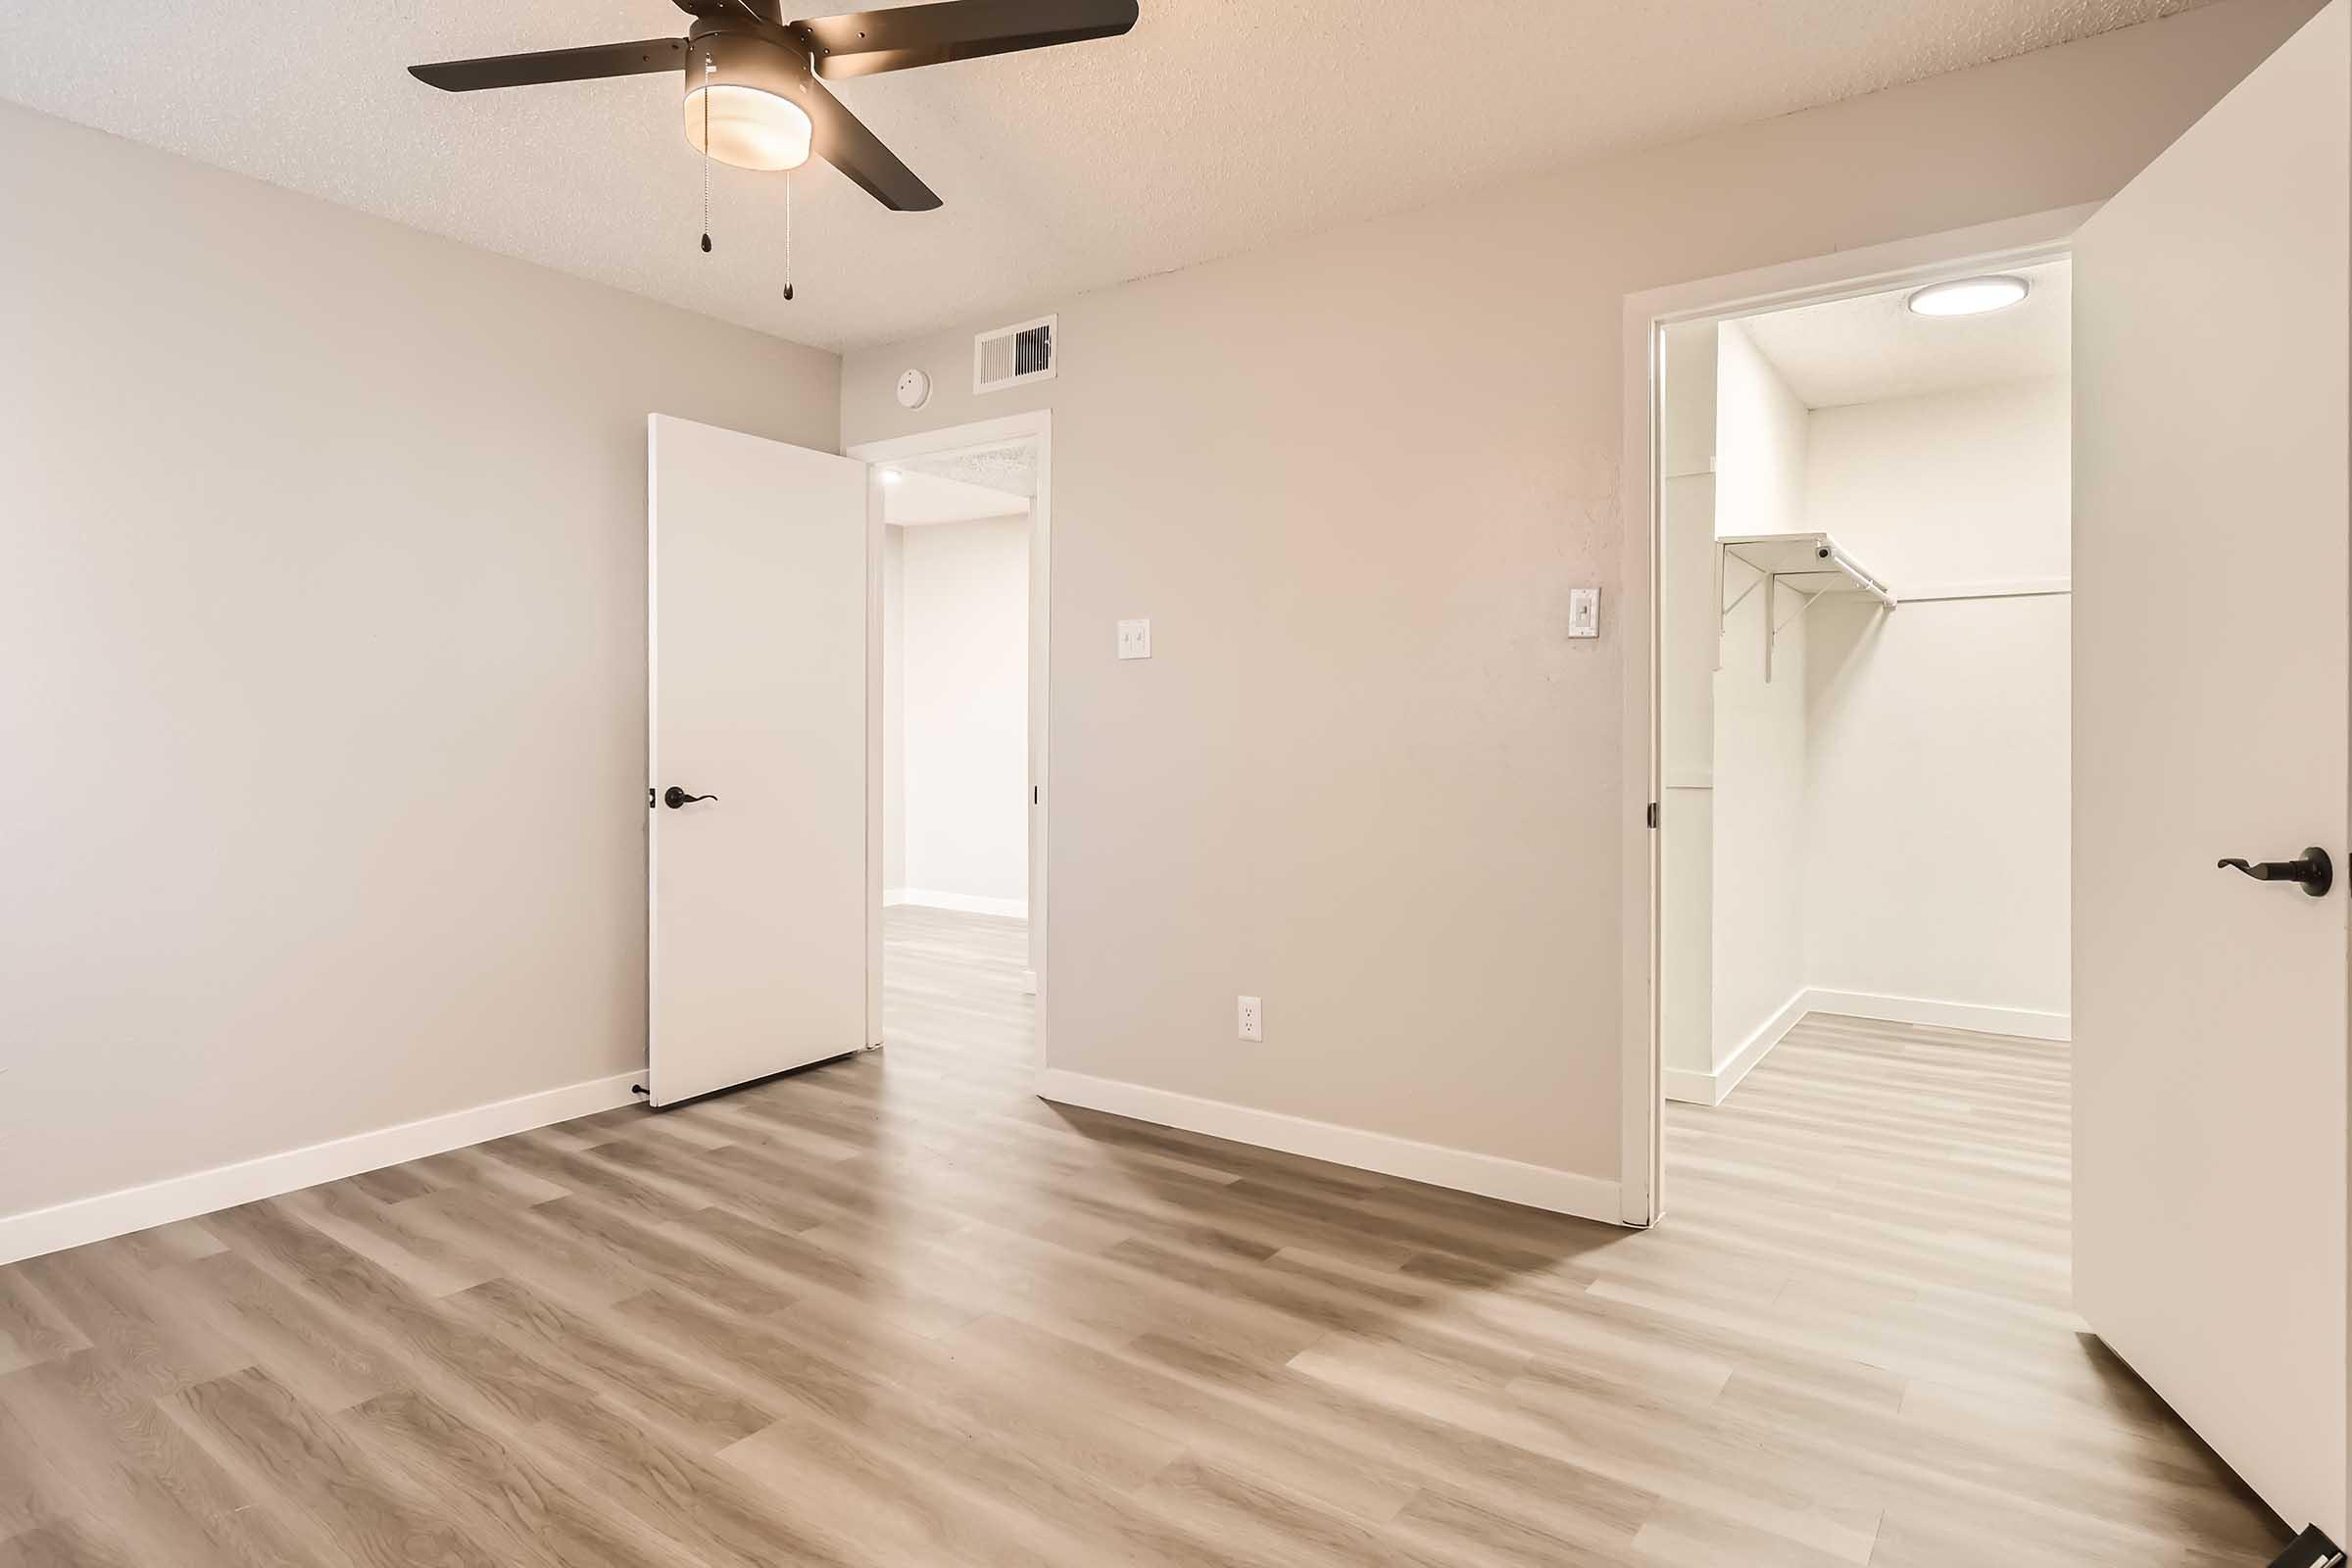 An apartment bedroom with wood-style flooring and a large closet at Rise North Arlington.